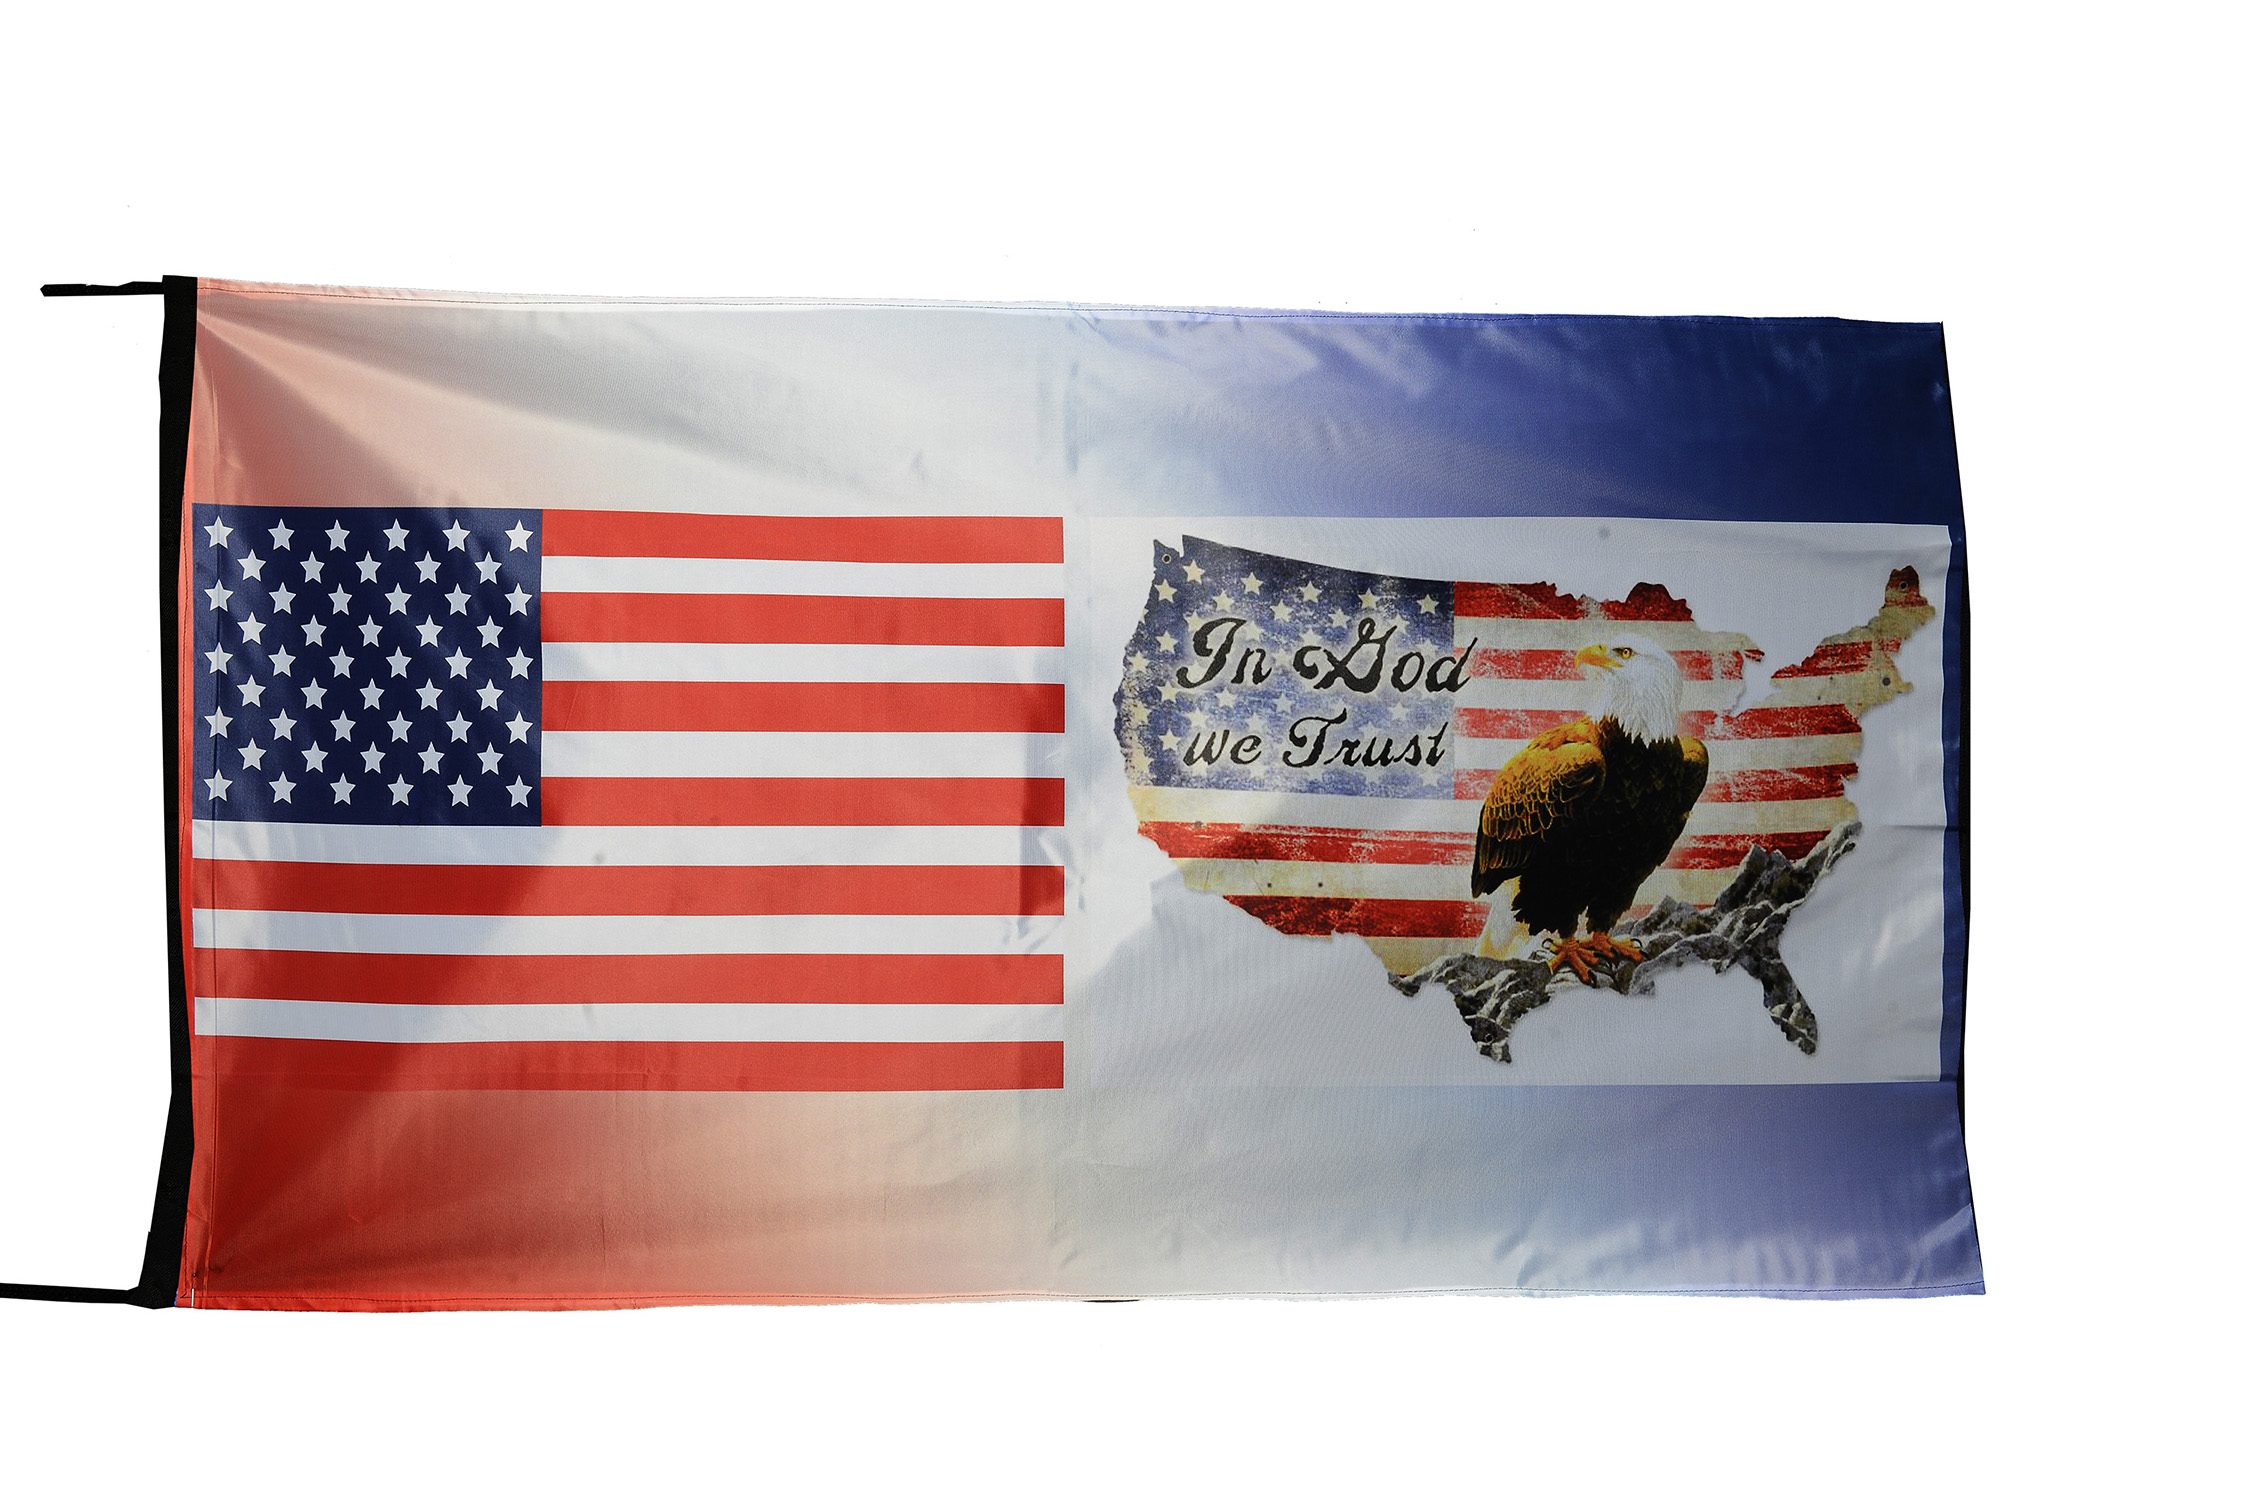 Flag  162 USA / US Country / United States Of America and Costa Rica / Patriotic / Pride Hybrid Weather-Resistant Polyester Outdoor Flag Landscape Banner / Vivid Colors / 3 X 5 FT (150 x 90cm) International Flags for Sale